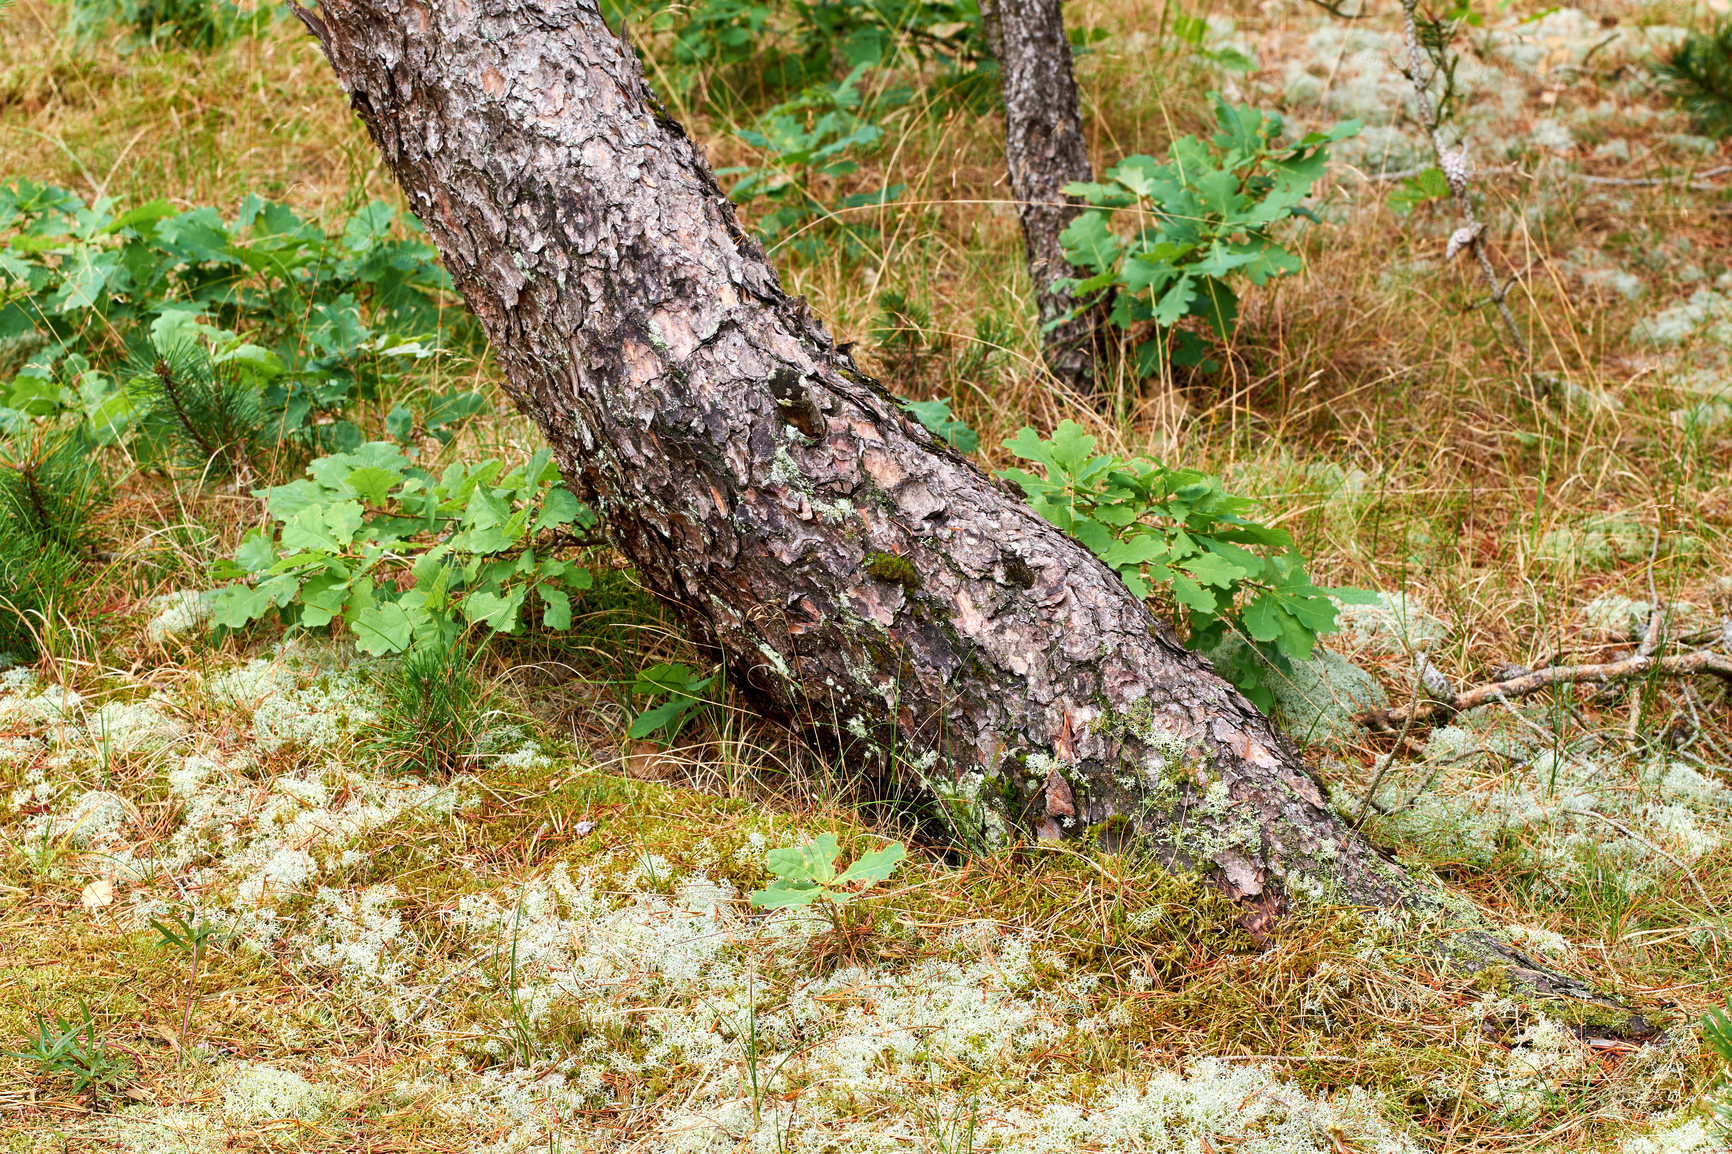 Buy stock photo Scenic and lush natural landscape with wooden texture of old bark on a sunny day in a remote and calm meadow or forest. Moss and algae growing on a slim pine tree trunk in a park or garden outdoors